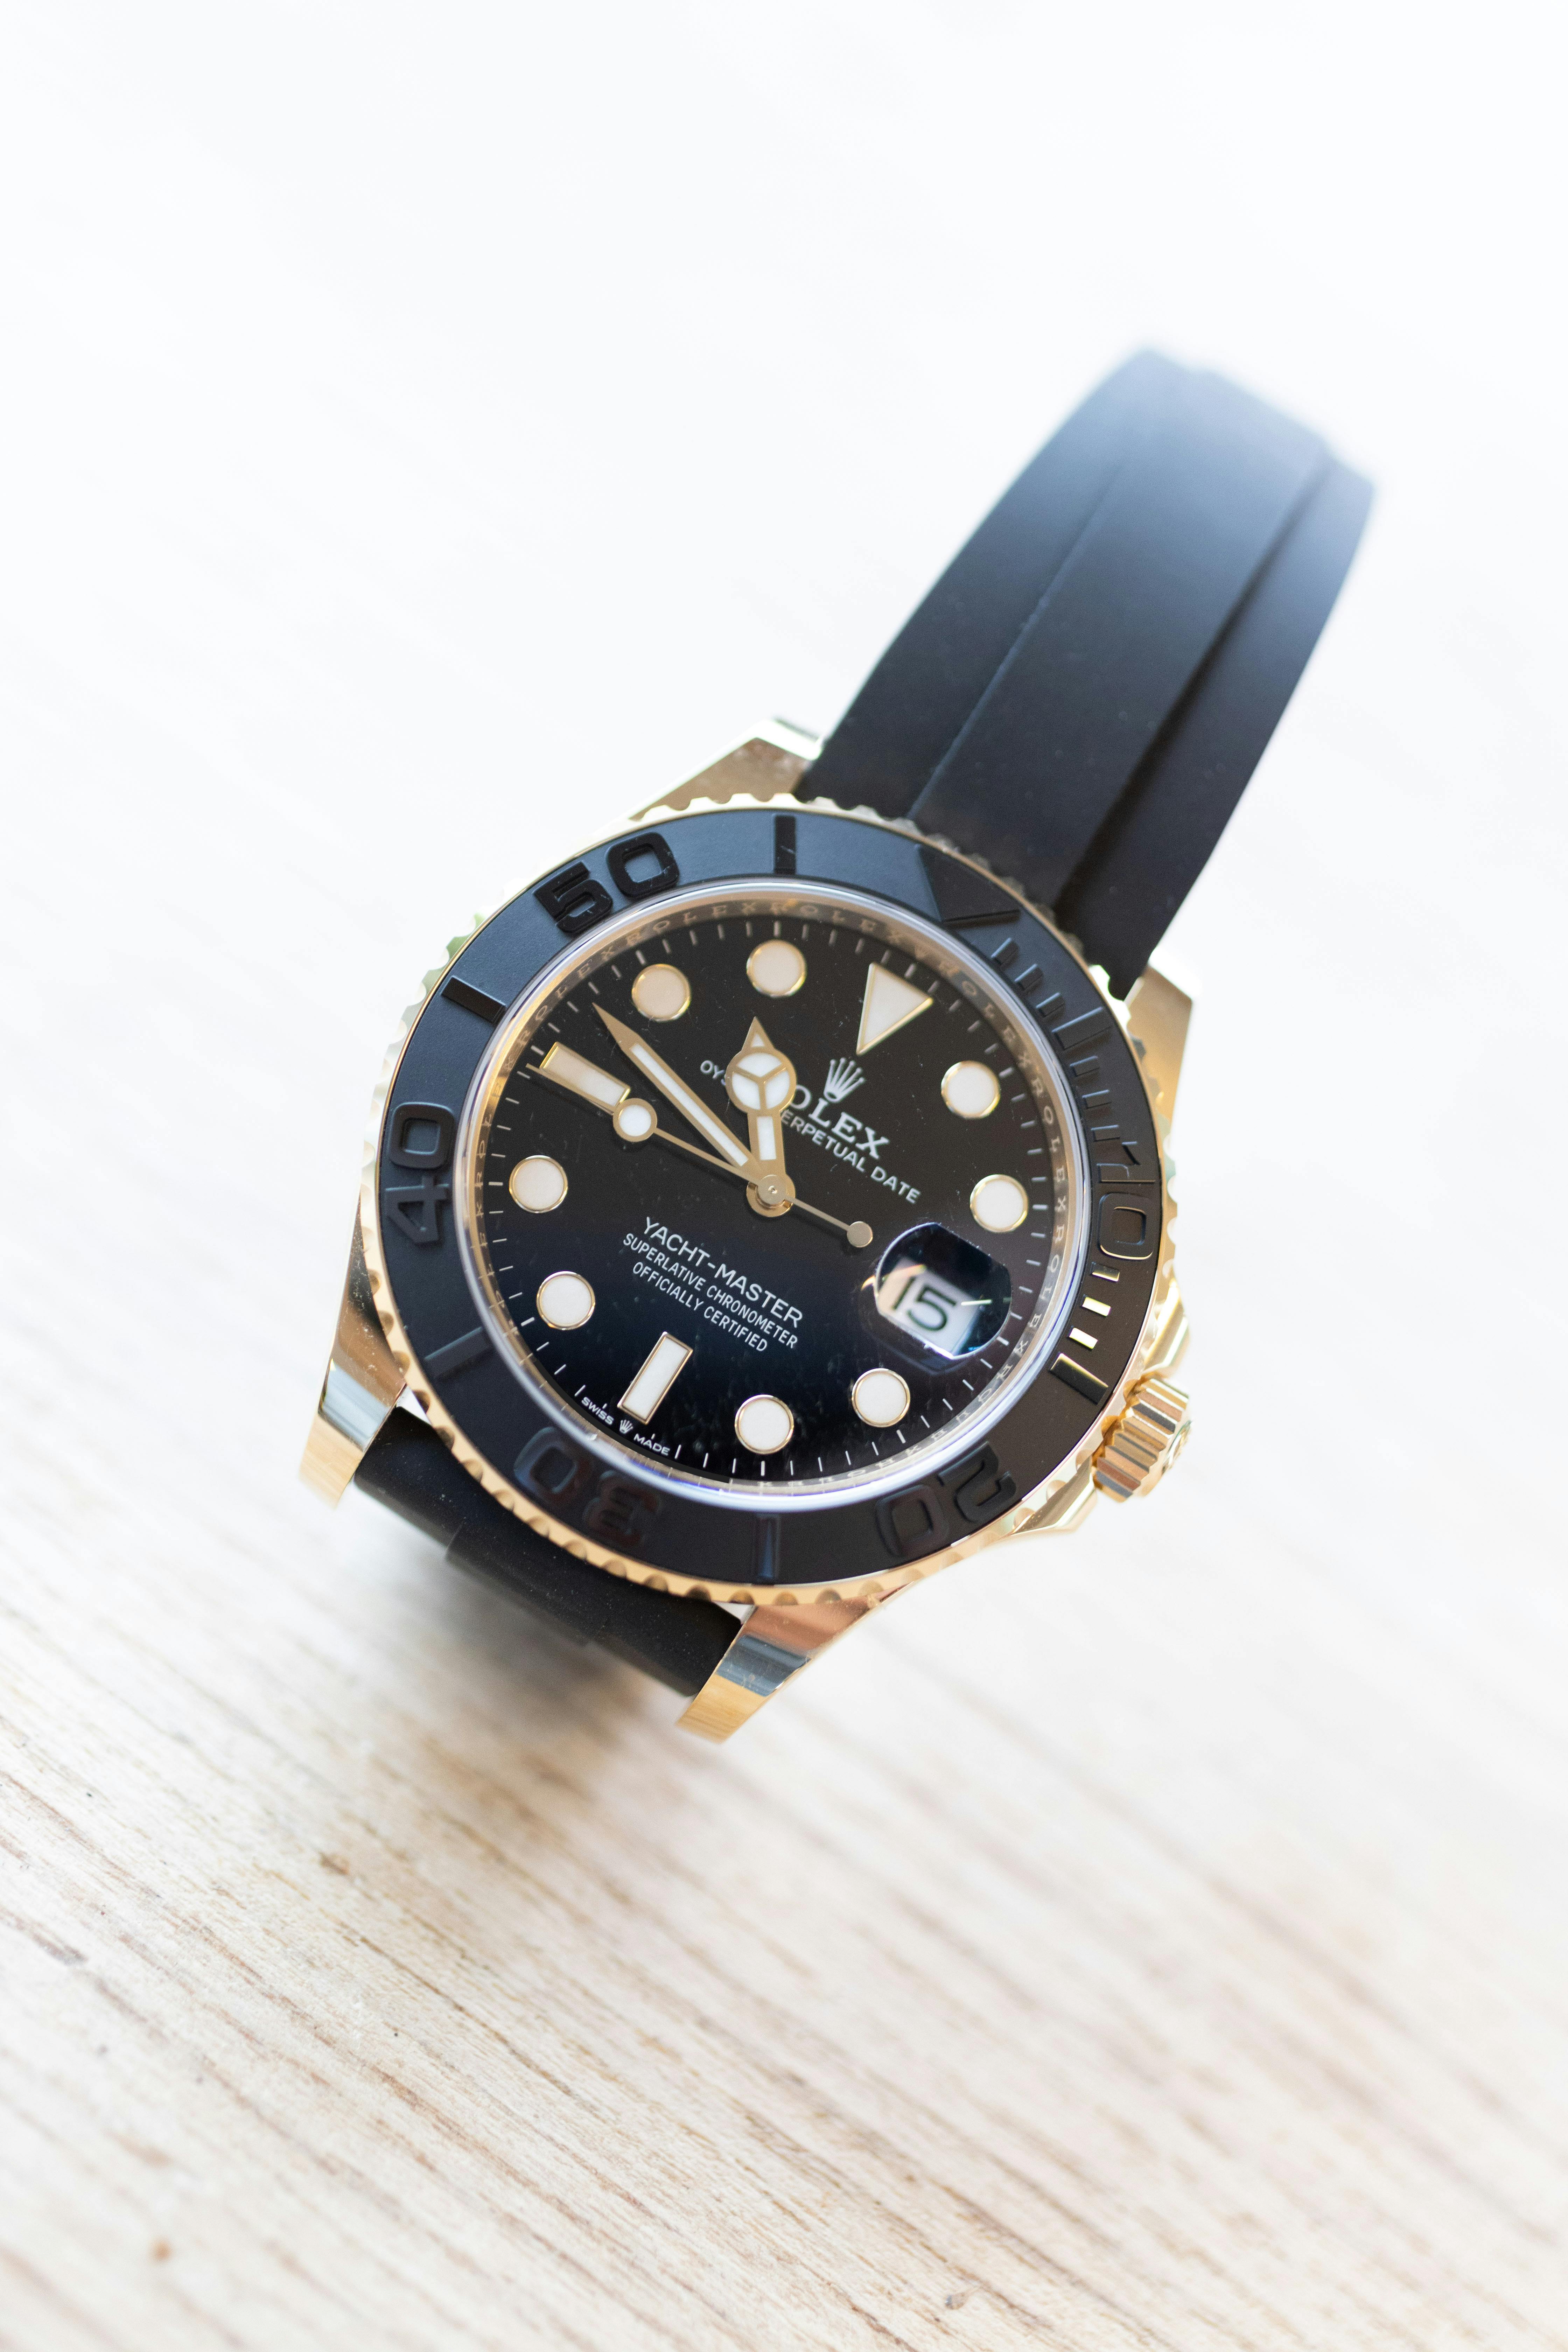 2022 ROLEX YACHT-MASTER 42 for sale by auction in Oxford, Oxfordshire,  United Kingdom